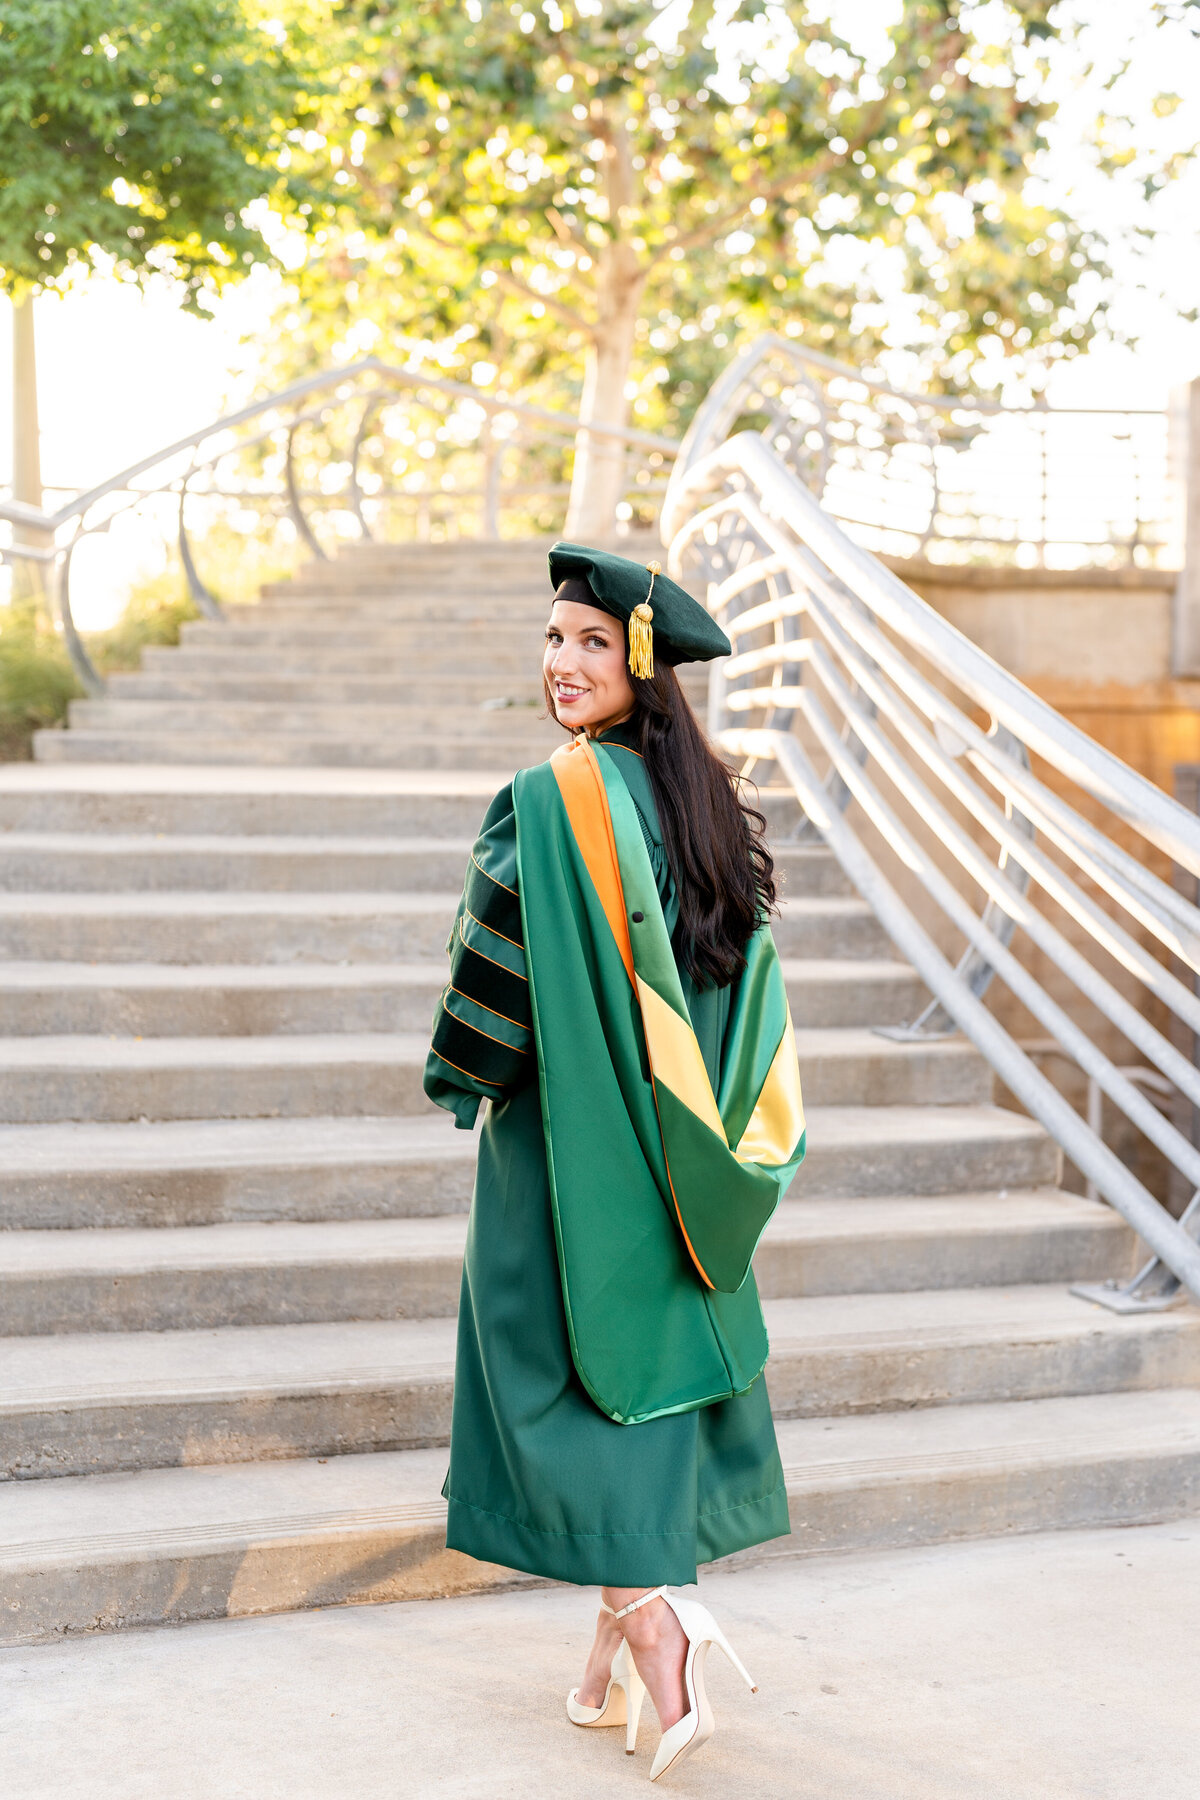 Baylor senior girl dressed in doctorate gown, hood and hat and looking back over shoulder while standing in front of stairs in Downtown Houston